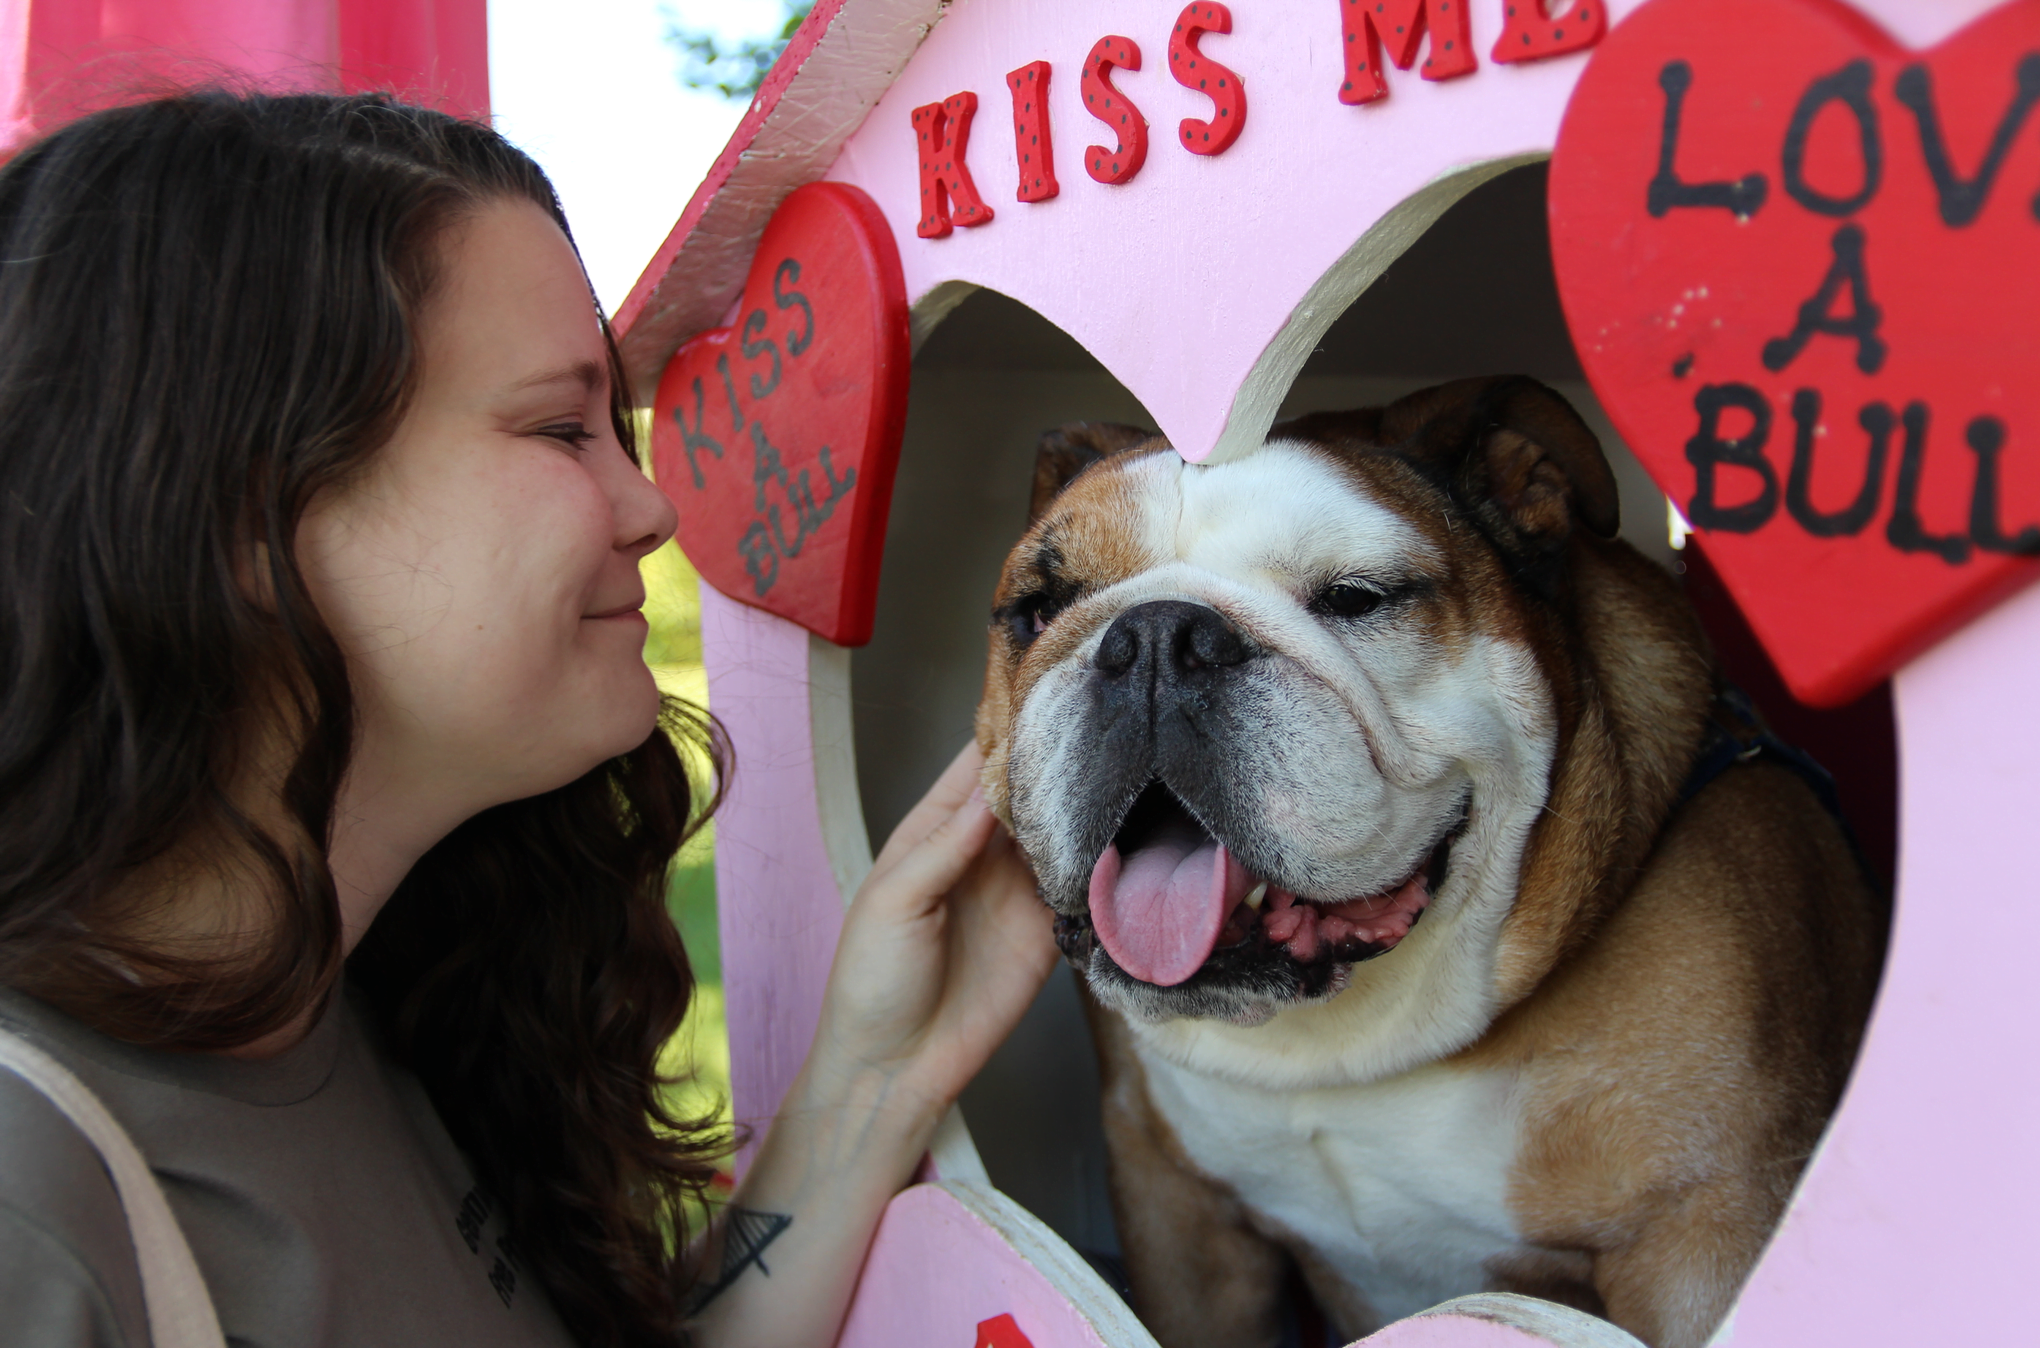 Ella Dawson snags a kiss from Alex the kissing booth to benefit Long Island Bull Dog Rescue at Puttin' on the Dog, Sept. 16, 2018 Photo: Leslie Yager